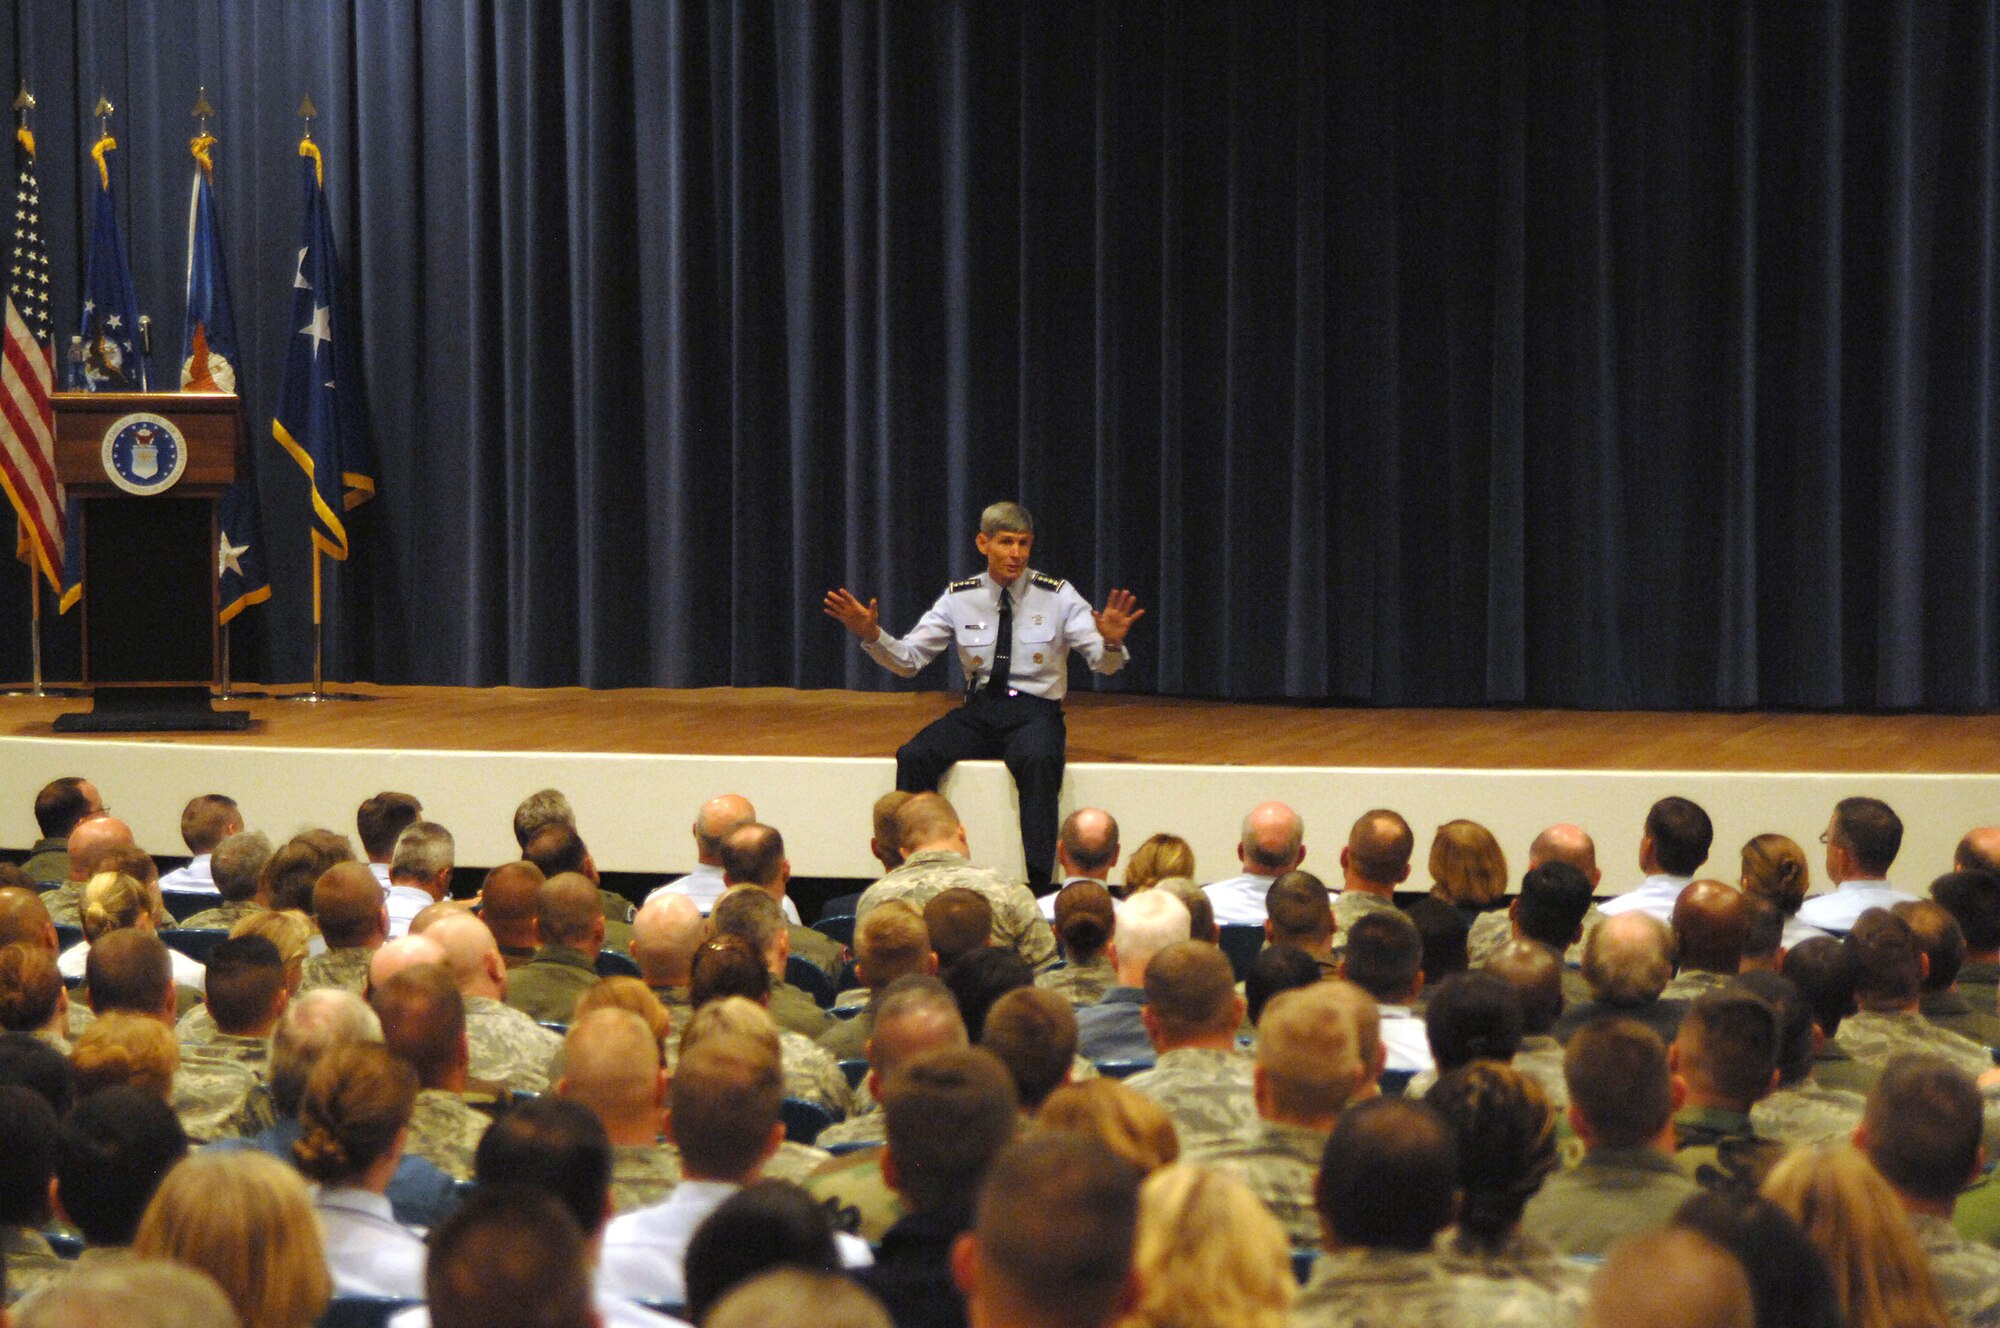 Gen. Norton A. Schwartz, Chief of Staff of the Air Force, addresses questions from Peterson Air Force Base, Colo., Airmen during his Sept. 2 visit. One of his key messages is that the Air Force must go back to basics. "We'll return to fundamentals in precision and reliability in all we do. Those two have sustained our Air Force for decades." (U.S. Air Force photo/Tech. Sgt. Matthew Lohr)